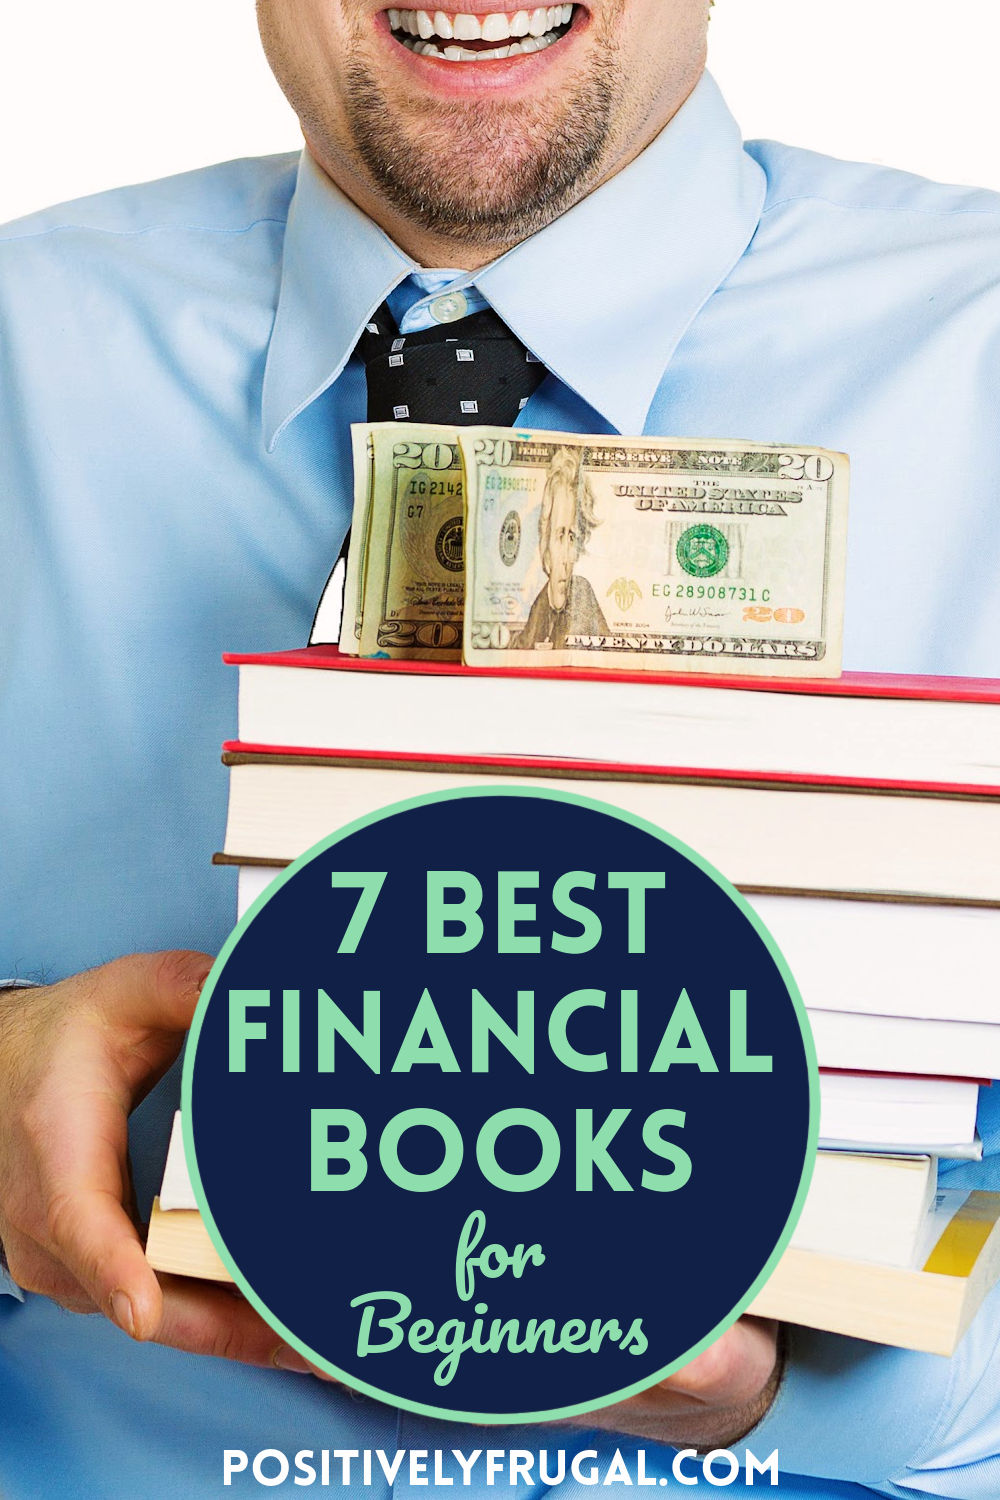 7 Best Financial Books for Beginners by PositivelyFrugal.com